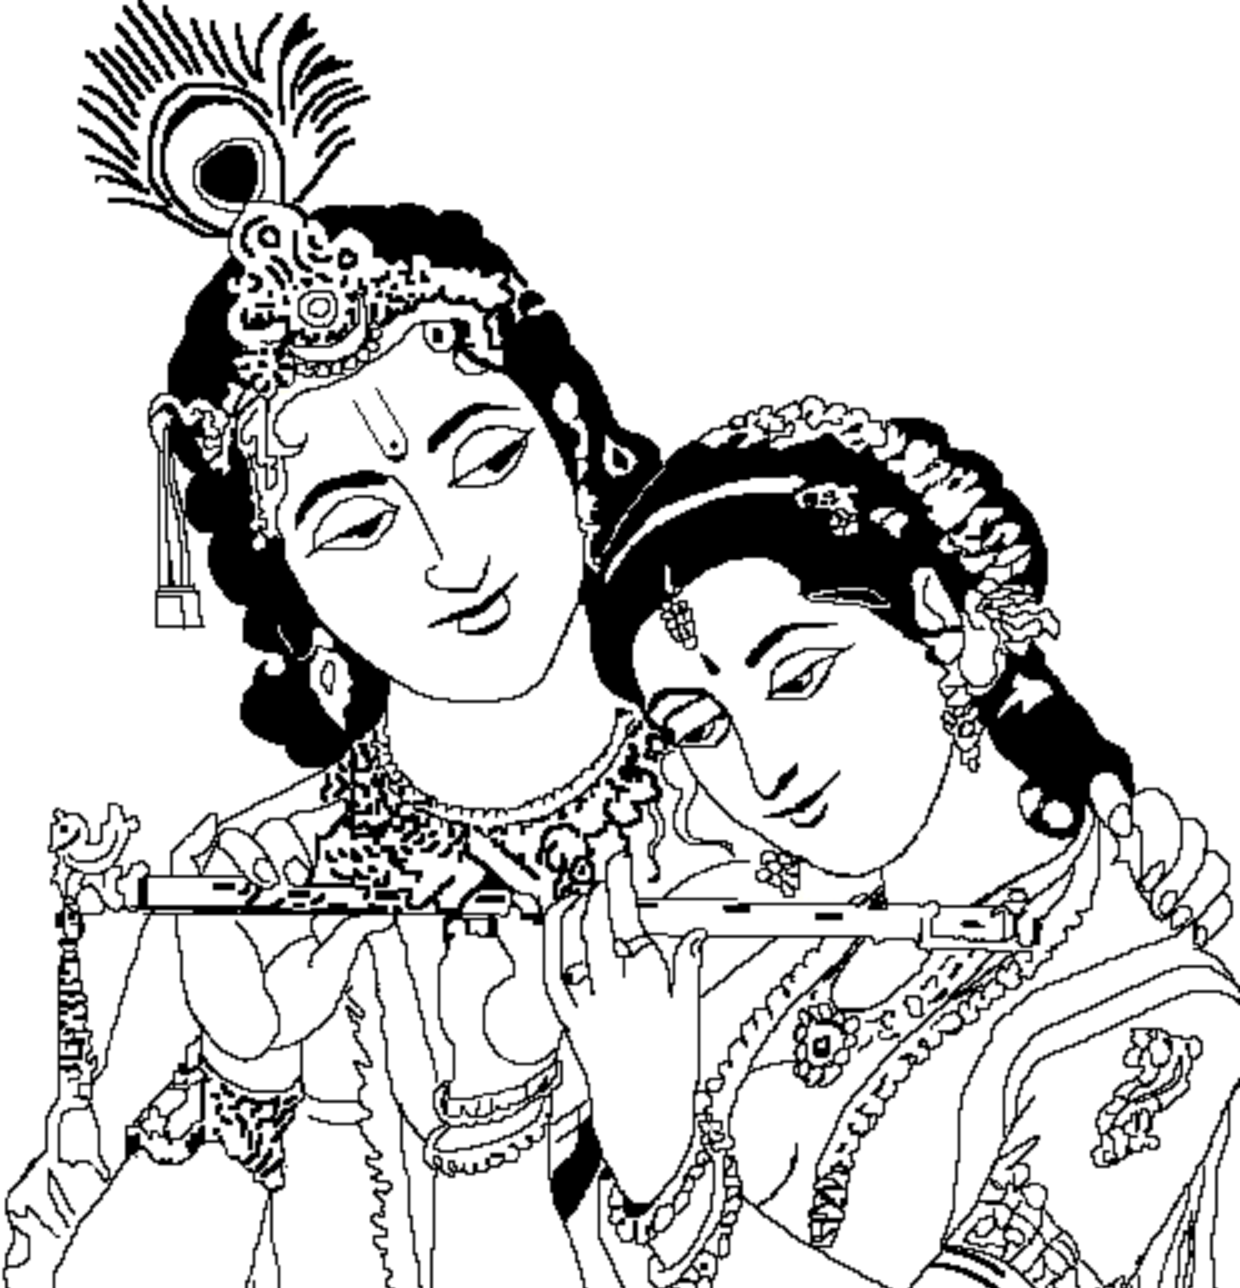 Radha Krishna drawing with charcoal pencil how is it please comment . . . .  . . . #sketch #art #artist #artwork #artgallery #painting #pa... | Instagram